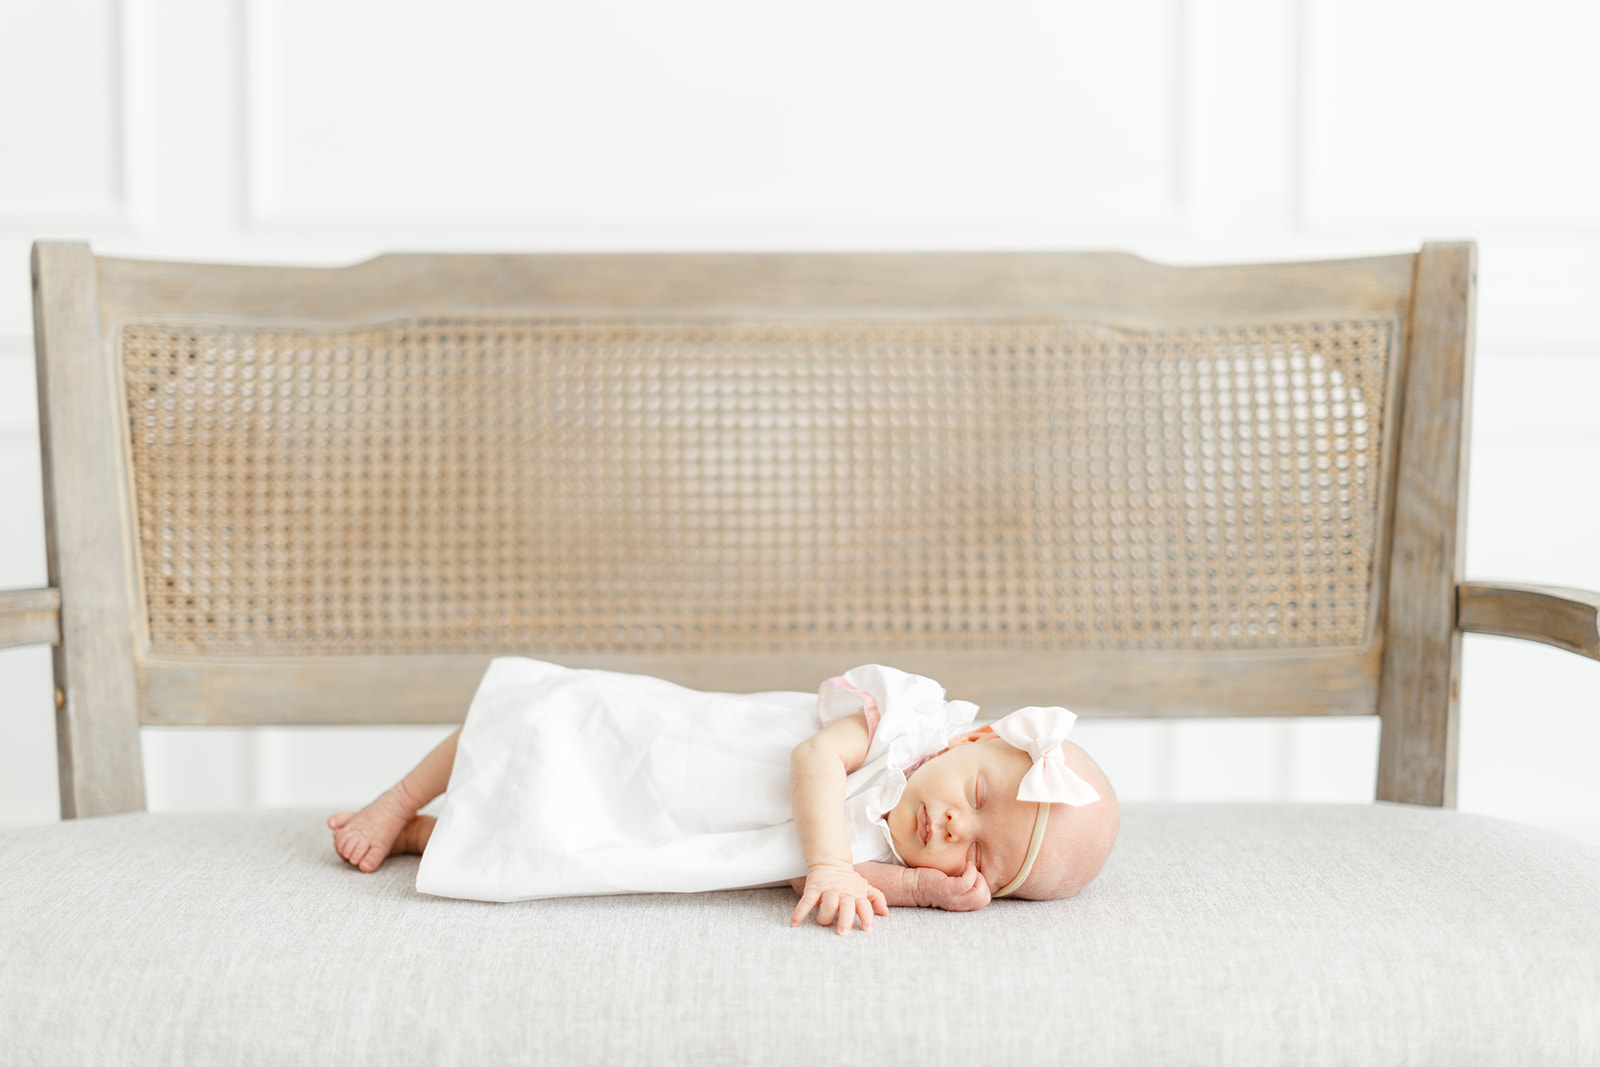 A newborn baby in a white dress and bow sleeps on a bench in a studio